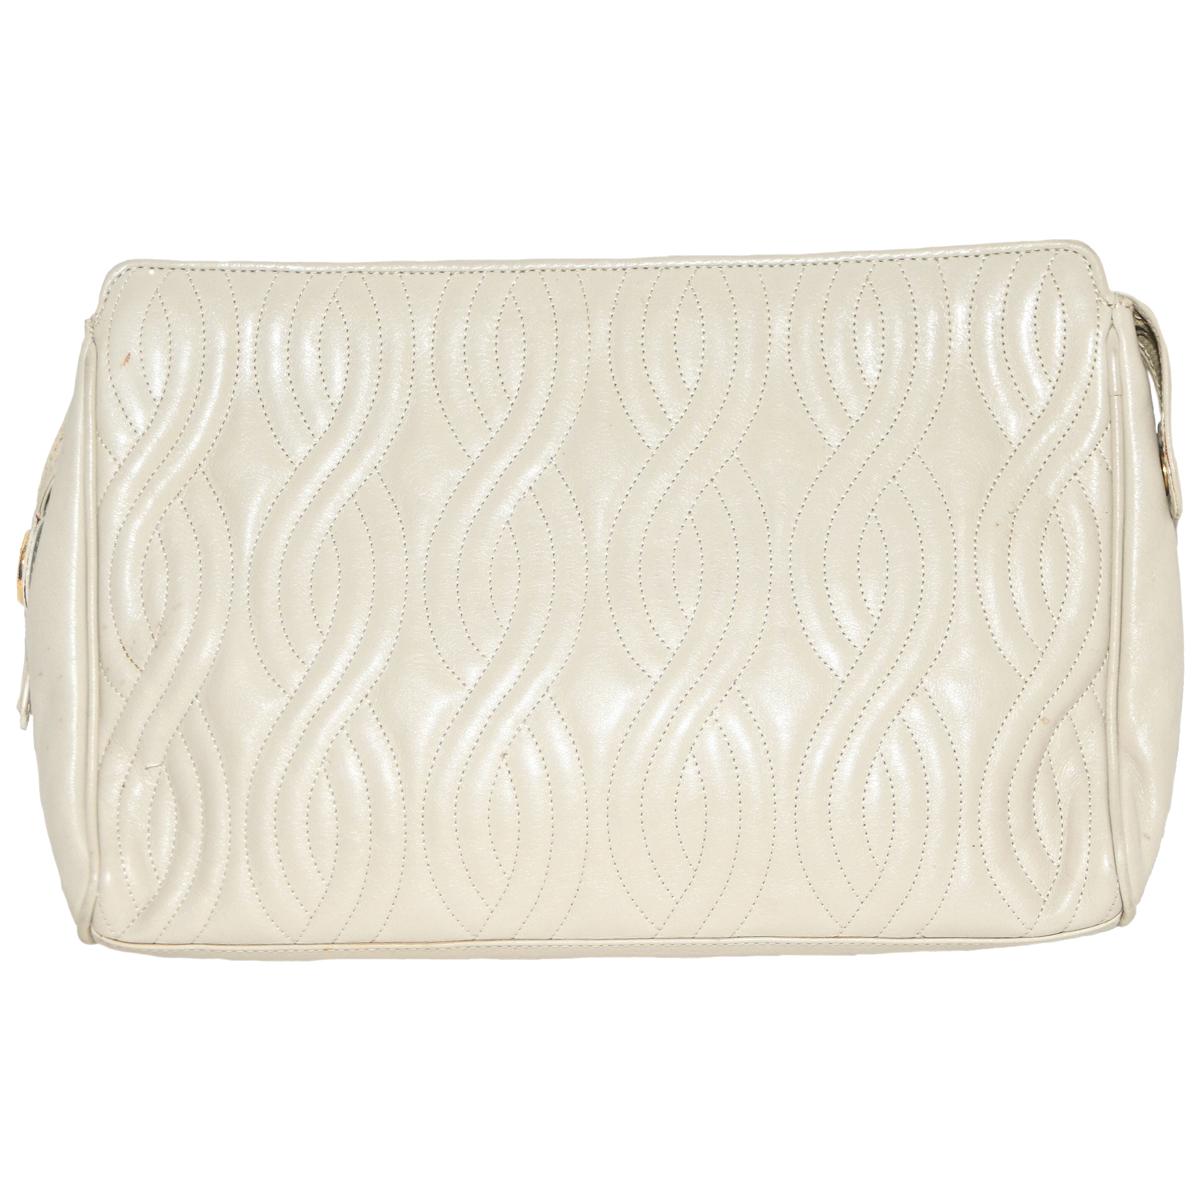 Fendi Quilted Beige Pasta Collection Bag For Sale